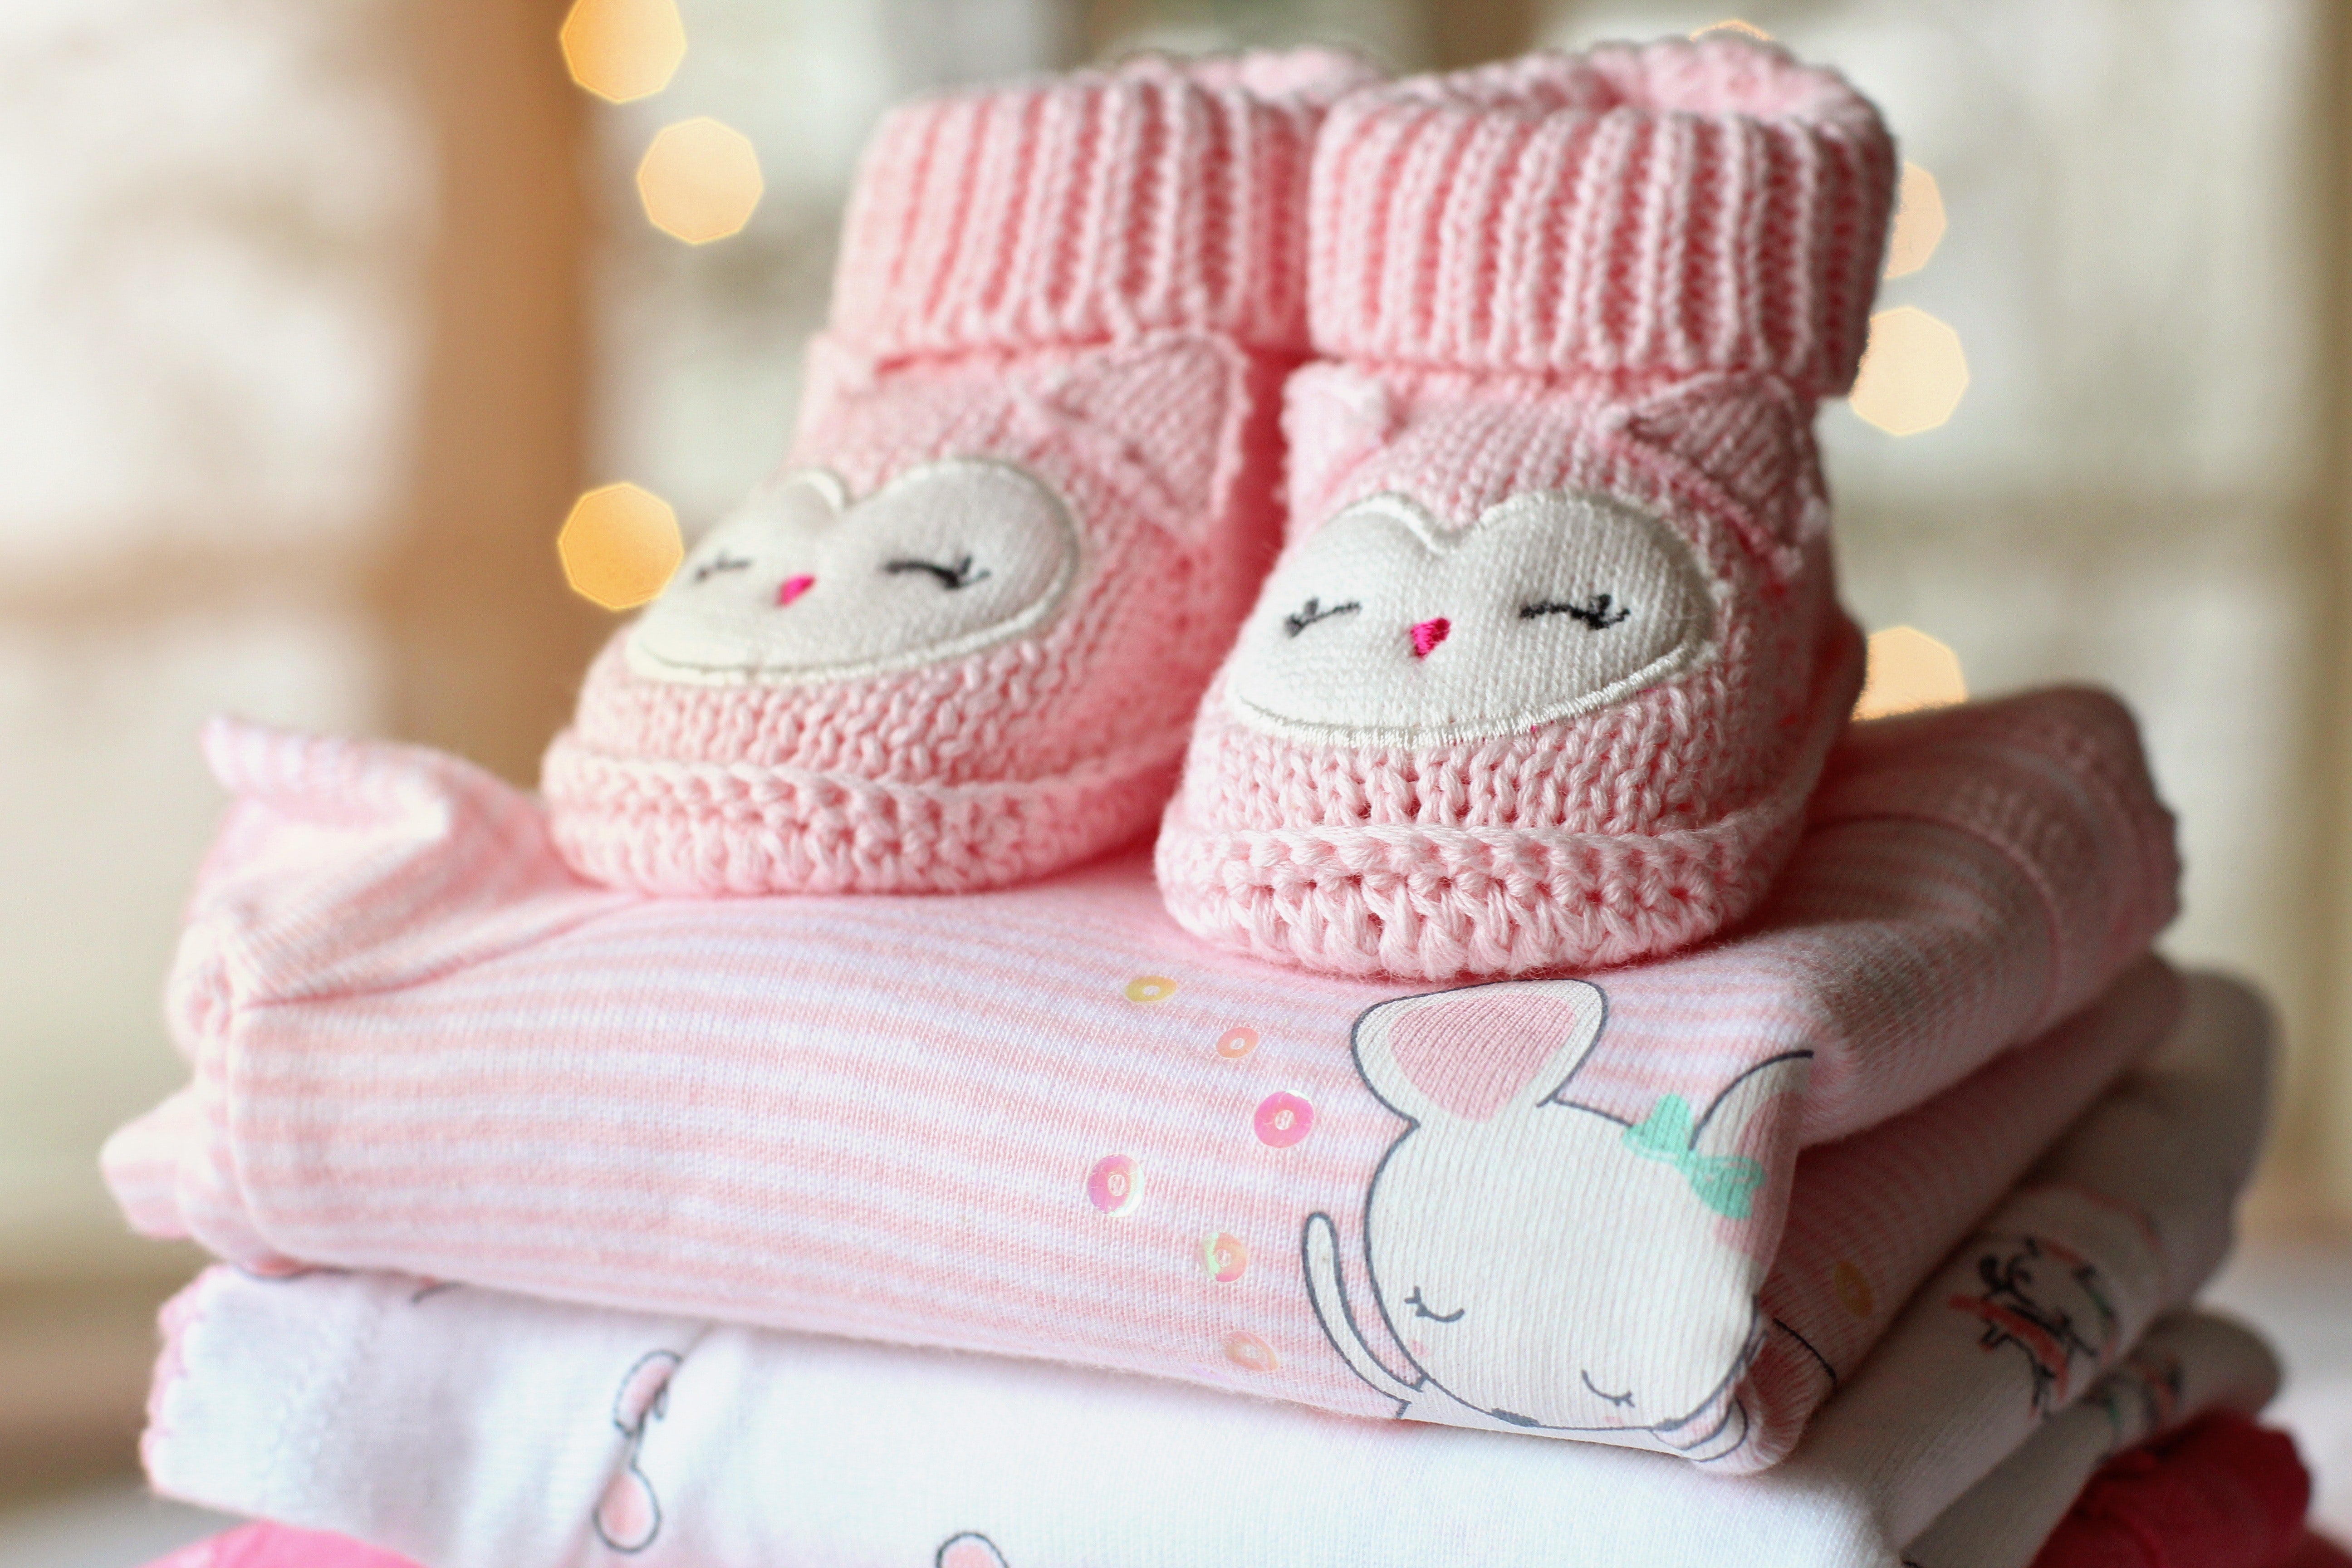 Must Have Baby Items: What You Need to Get Before Baby Arrives?